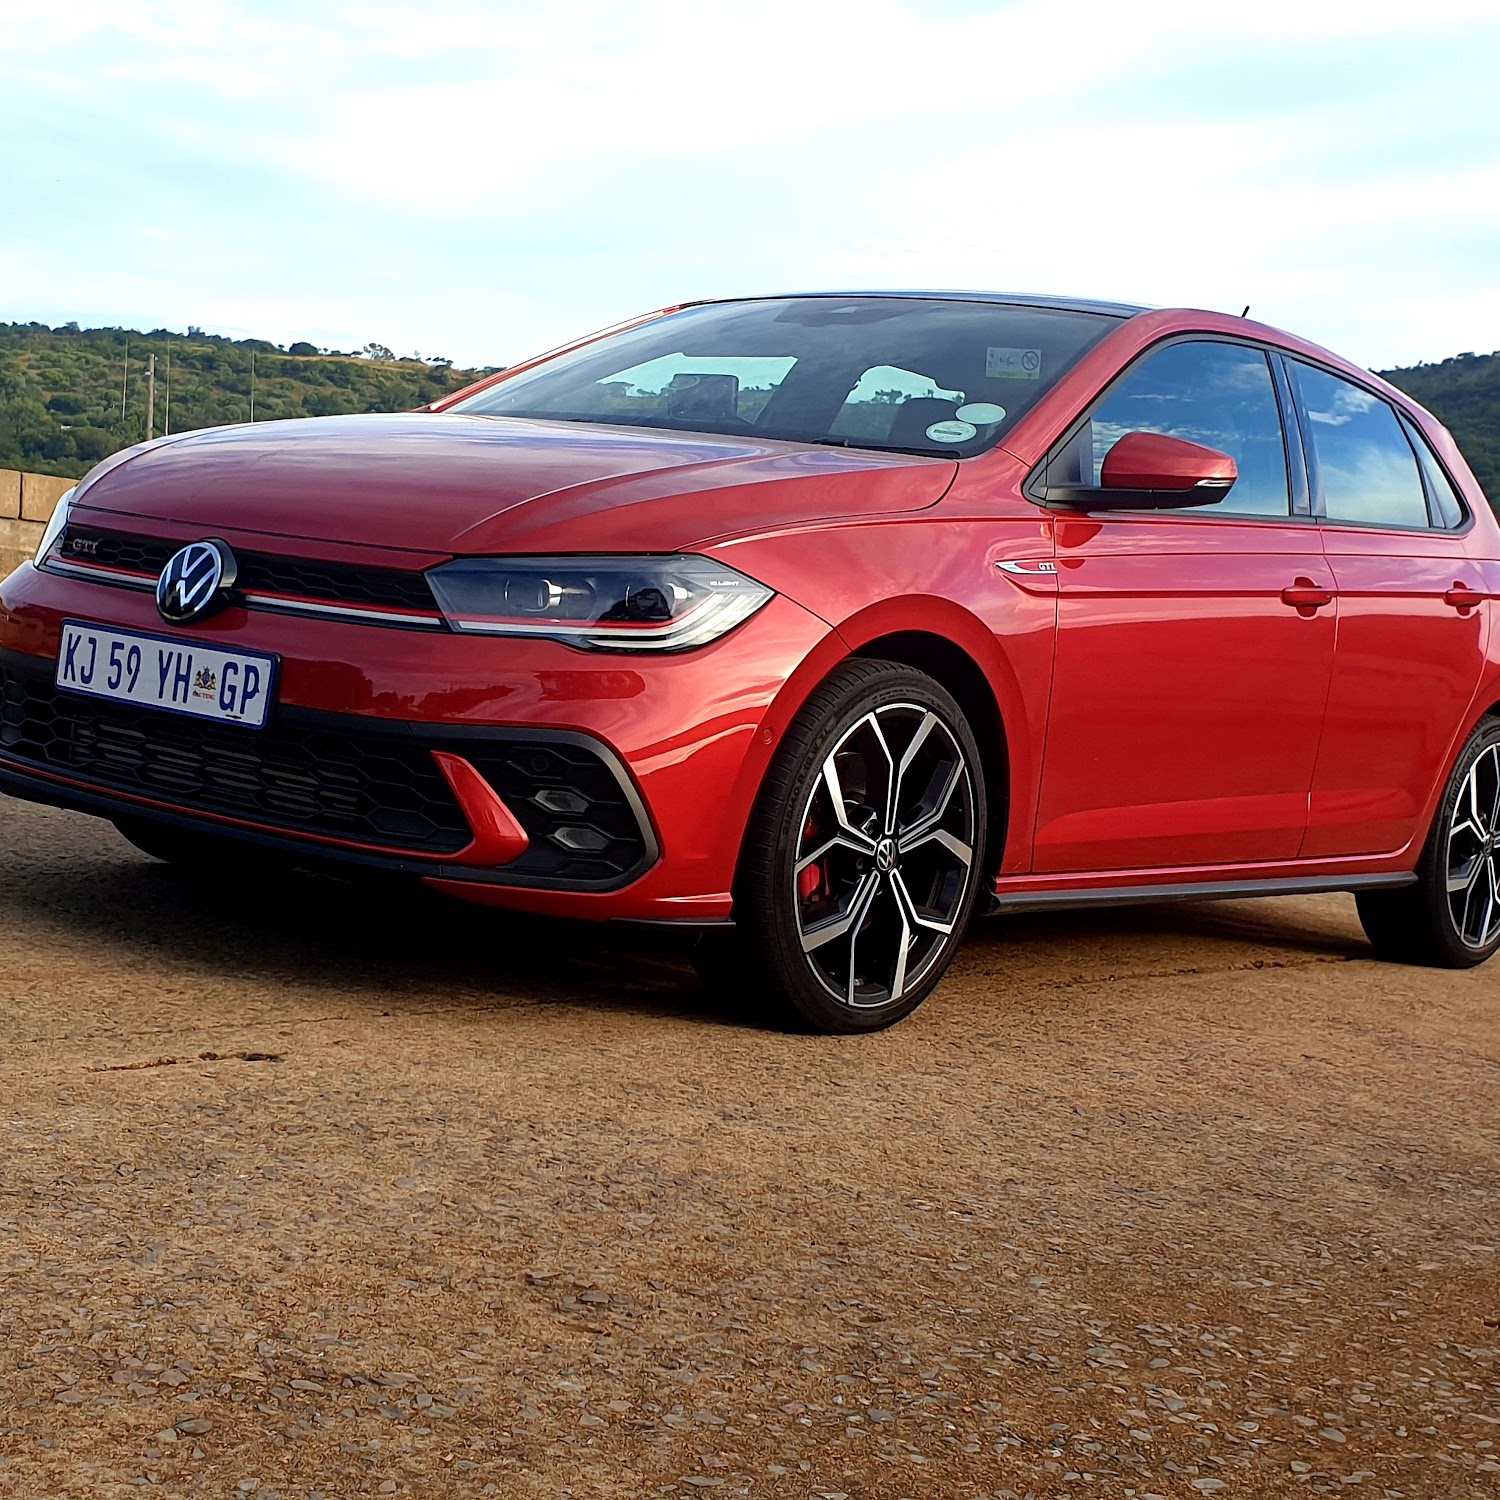 Polo GTI is a hot hatch for not-completely-silly money